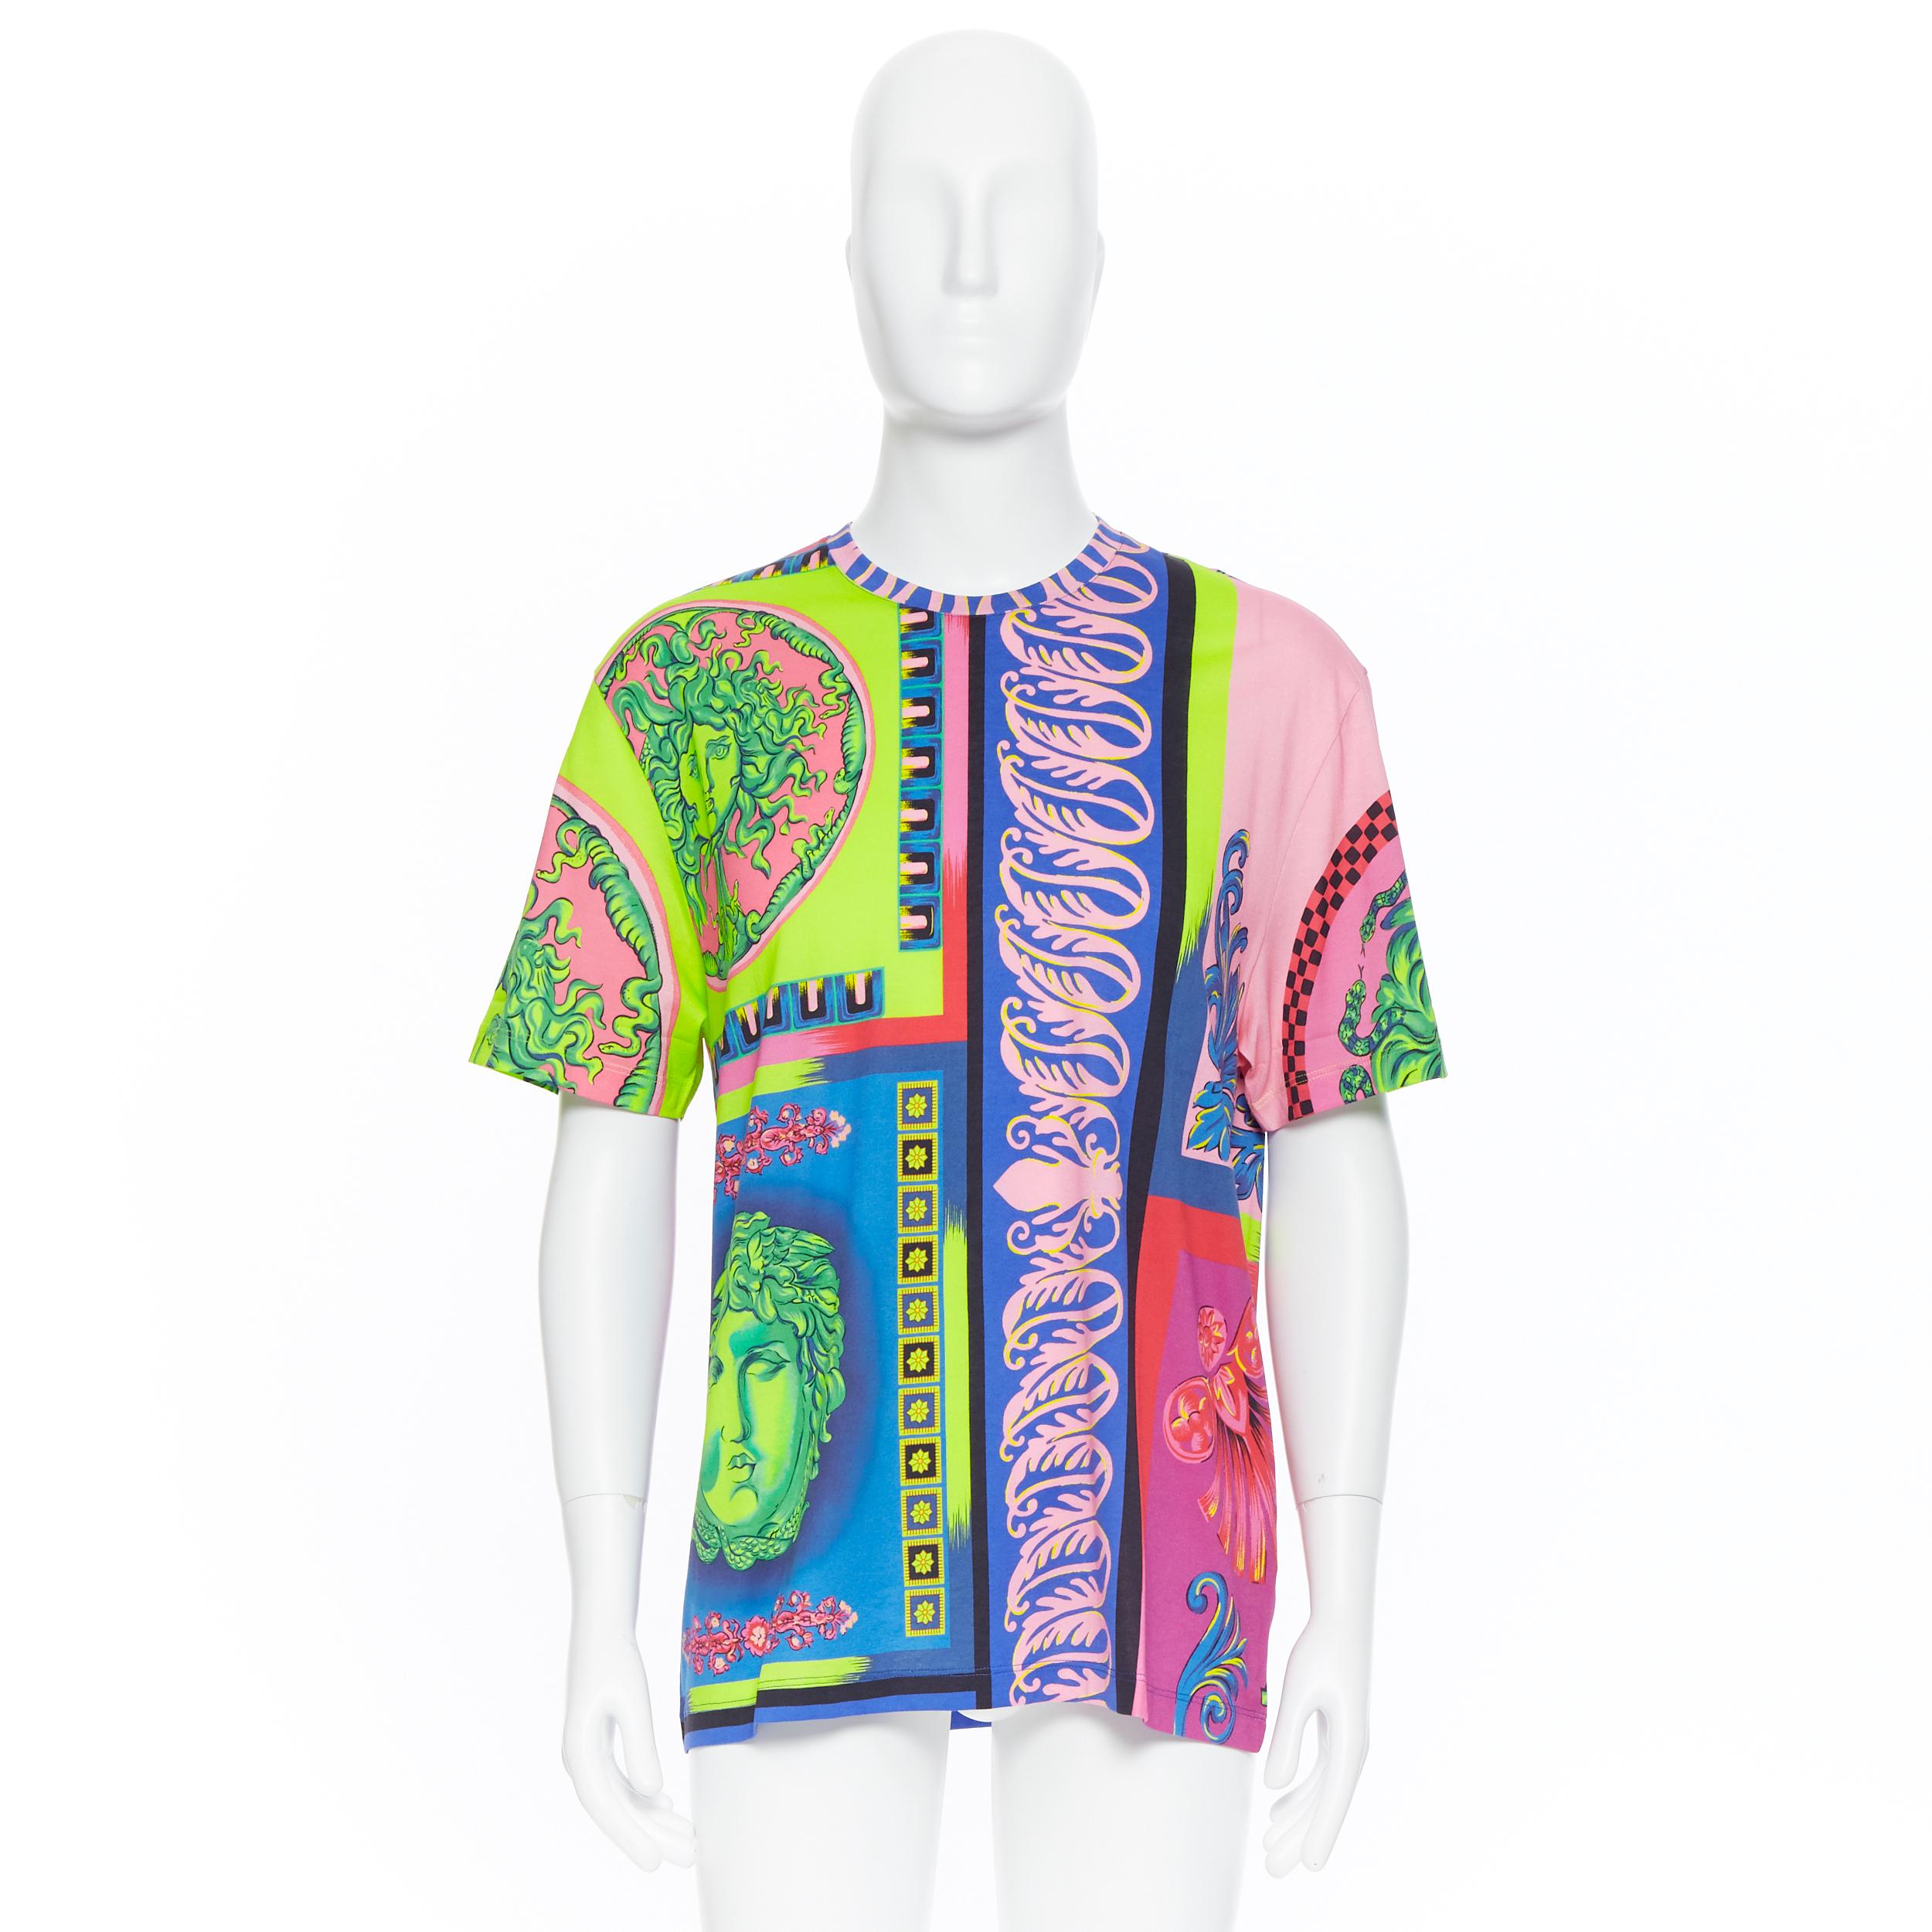 new VERSACE  Pop Foulard 100% cotton neon Medusa graphic print t-shirt top M
Brand: Versace
Designer: Donatella Versace
Collection: Pre-fall 2018
Model Name / Style: Printed t-shirt
Material: Cotton
Color: Multicolour
Pattern: Other; neon pop